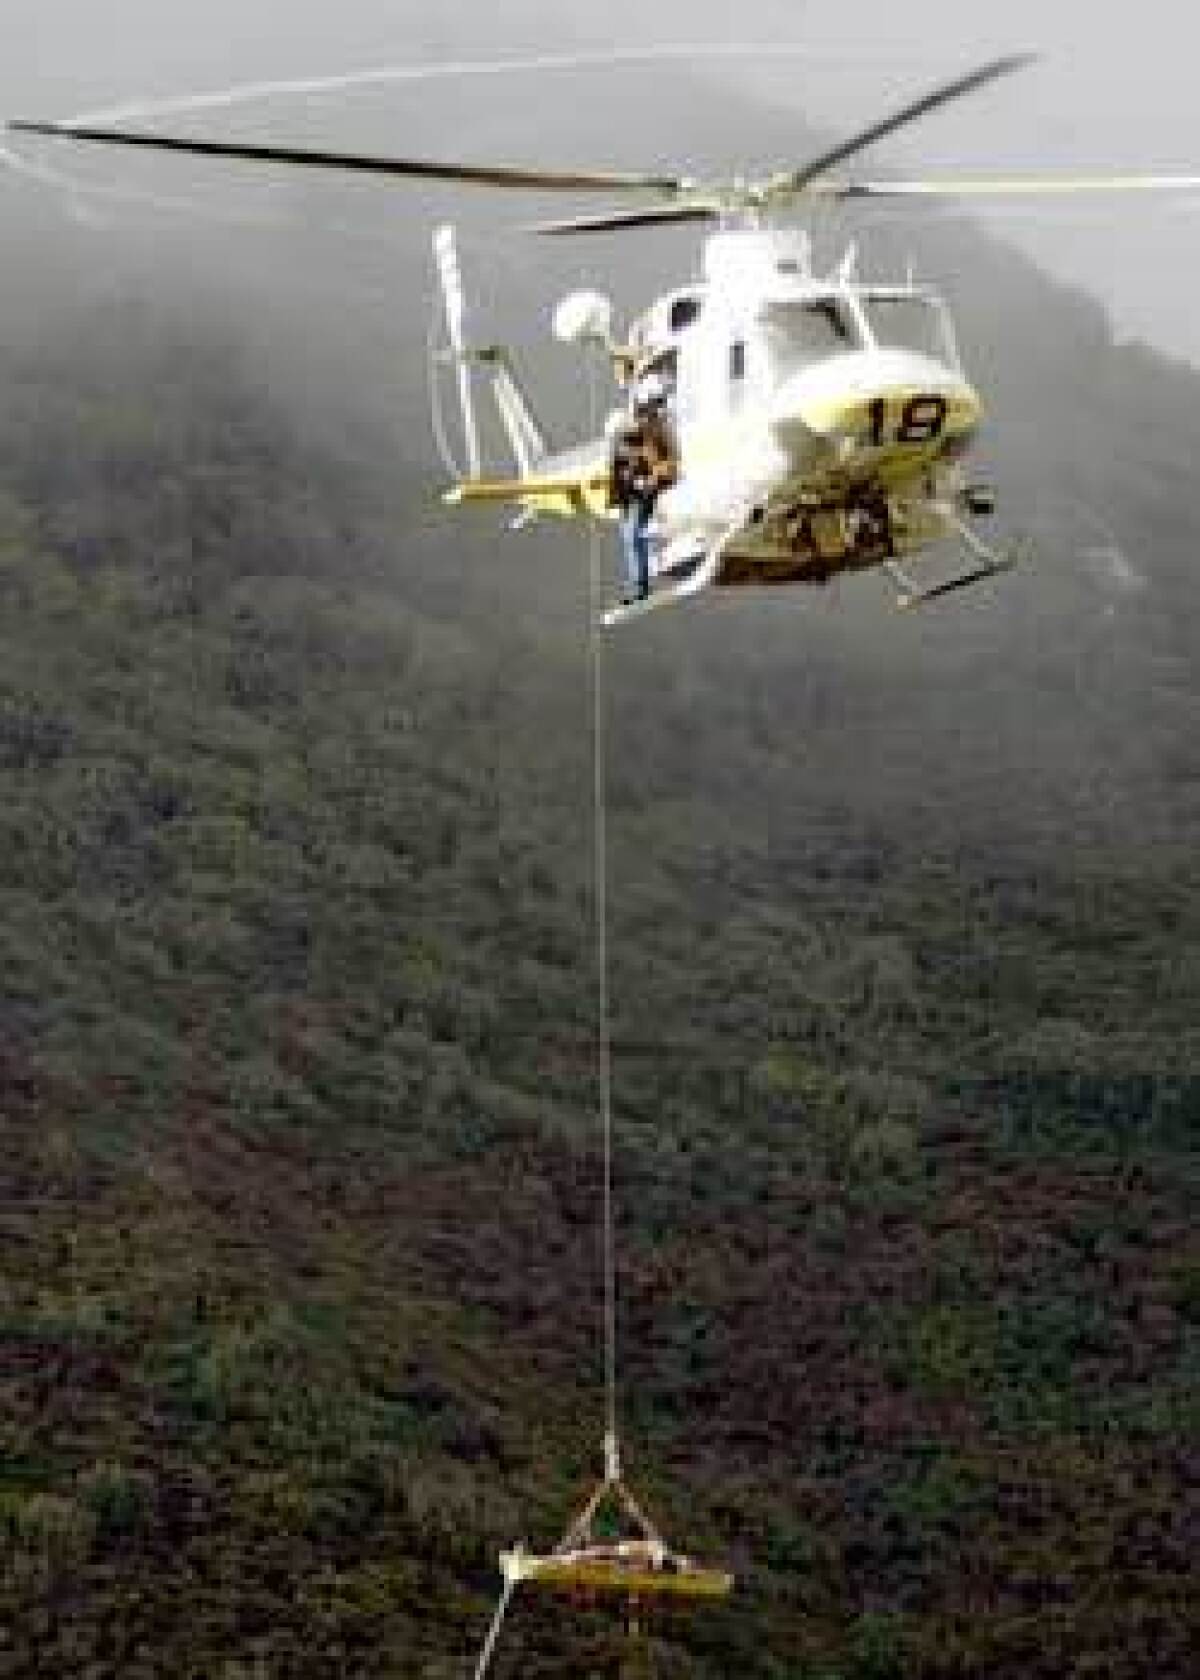 Los Angeles County Fire Department rescue personnel pull a victim out of the ravine where a commuter van carrying workers at NASA's Jet Propulsion Laboratory crashed. The van, on the way to JPL from the Antelope Valley, tumbled about 200 feet down an embankment from the Angeles Crest Highway in the Angeles National Forest. Three workers were killed and two others critically injured.